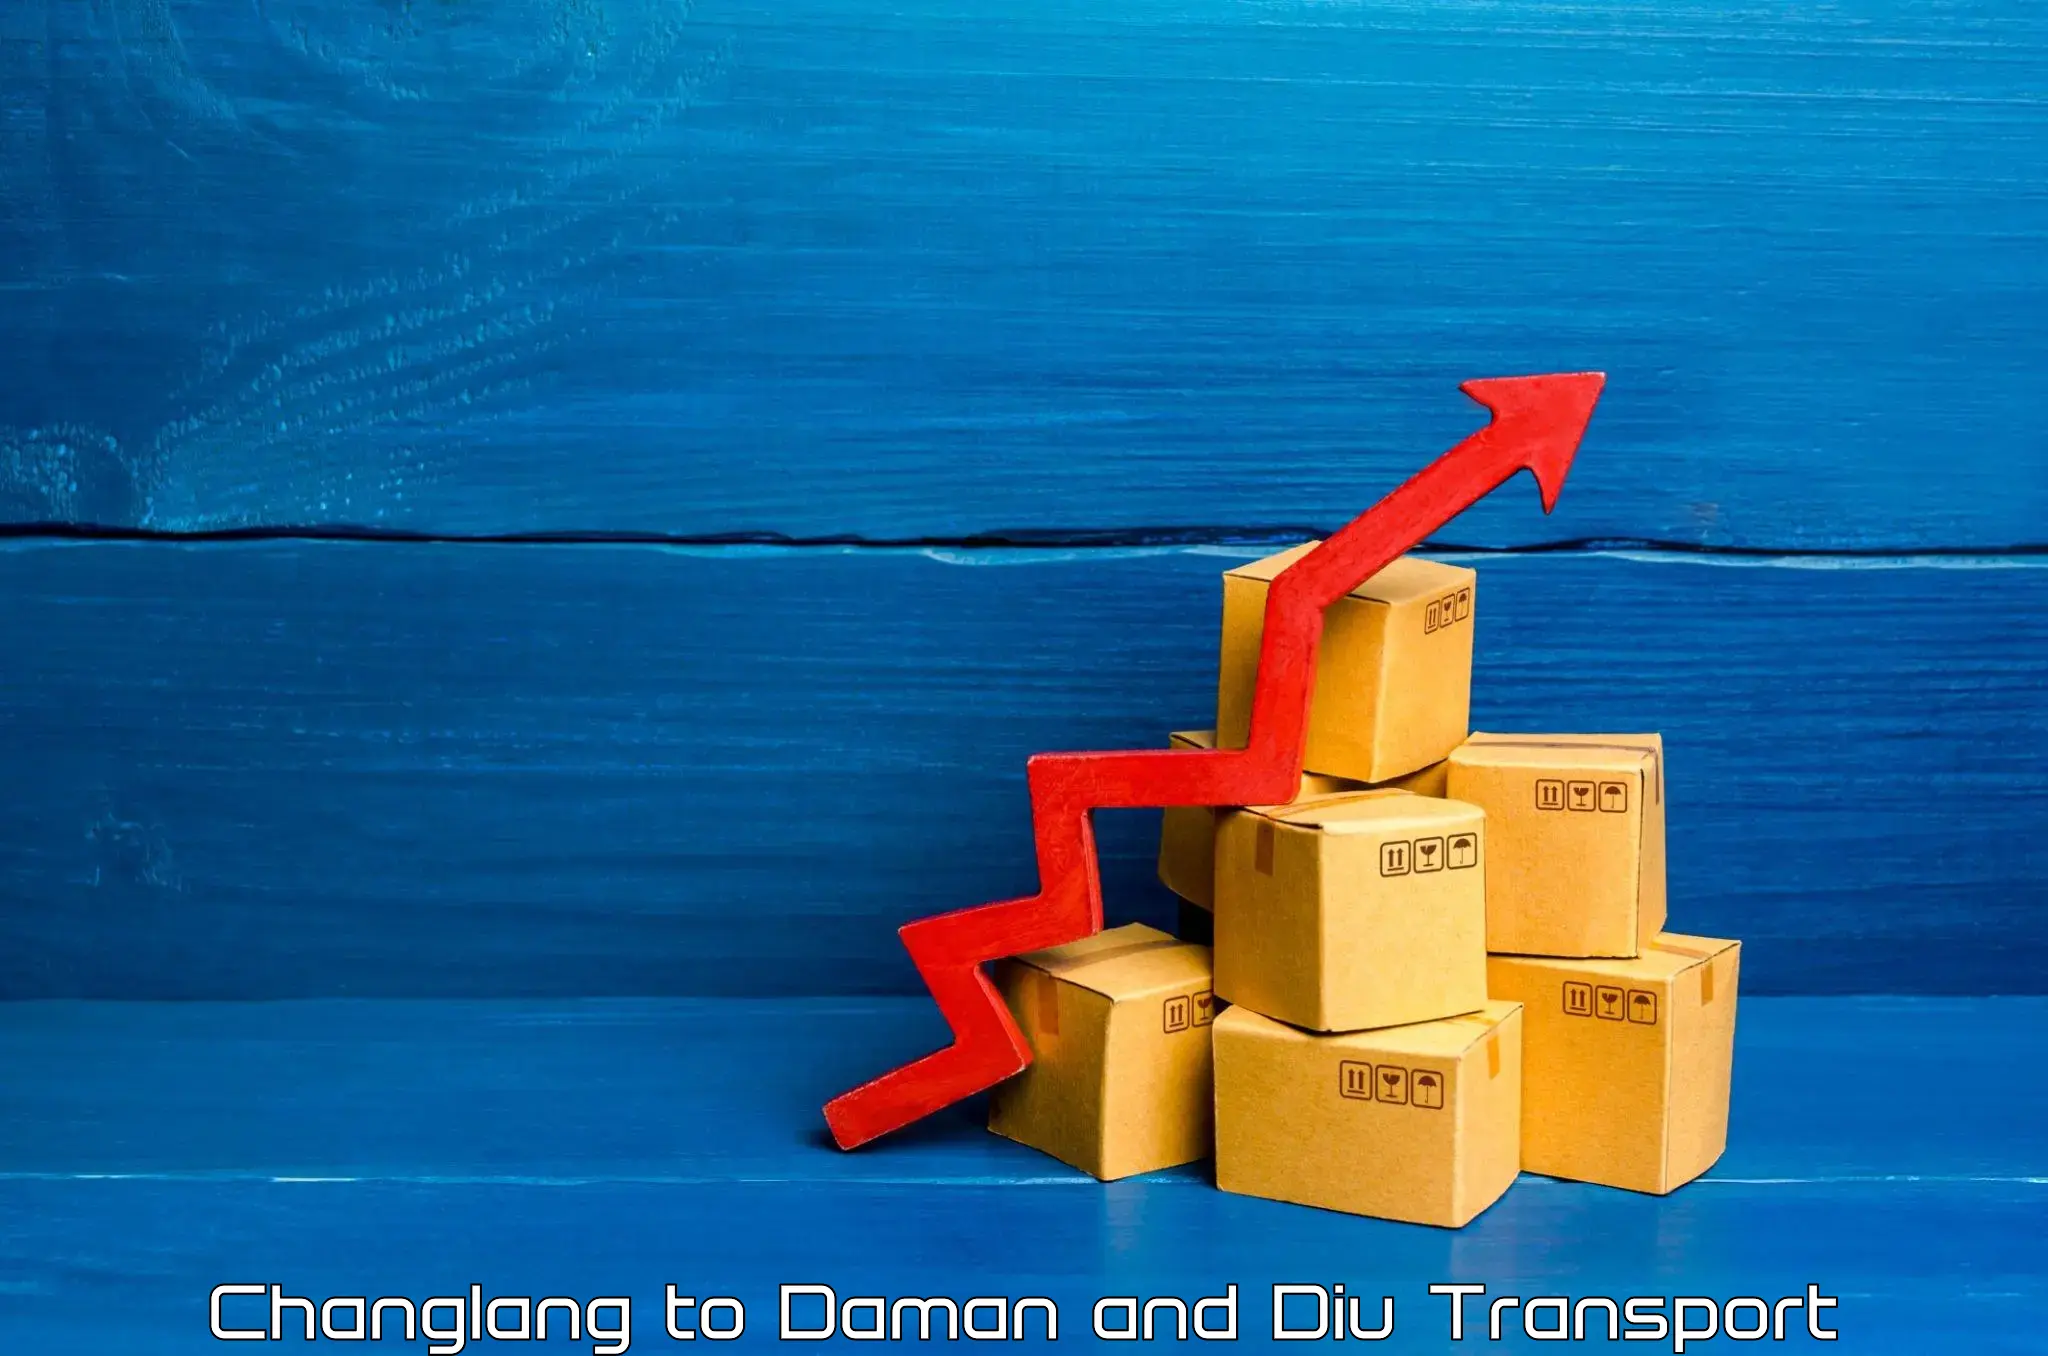 Shipping services Changlang to Diu